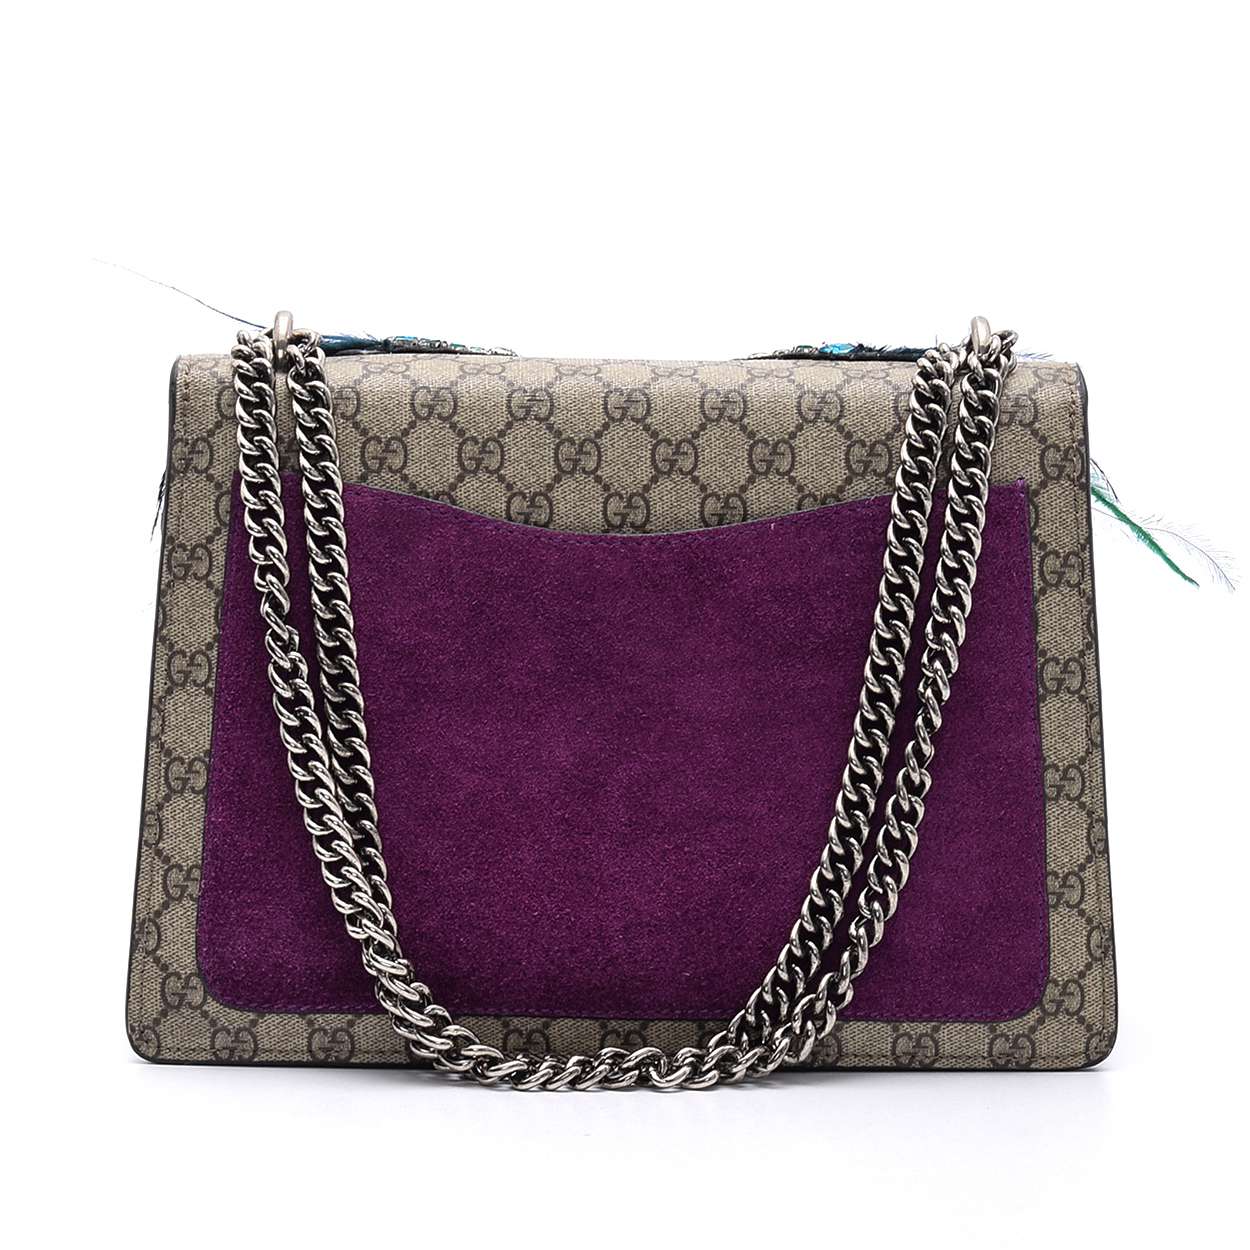 Gucci - Dionysus  Gg Supreme  Parrot Embroidered  Chain Limited Shoulder Bag